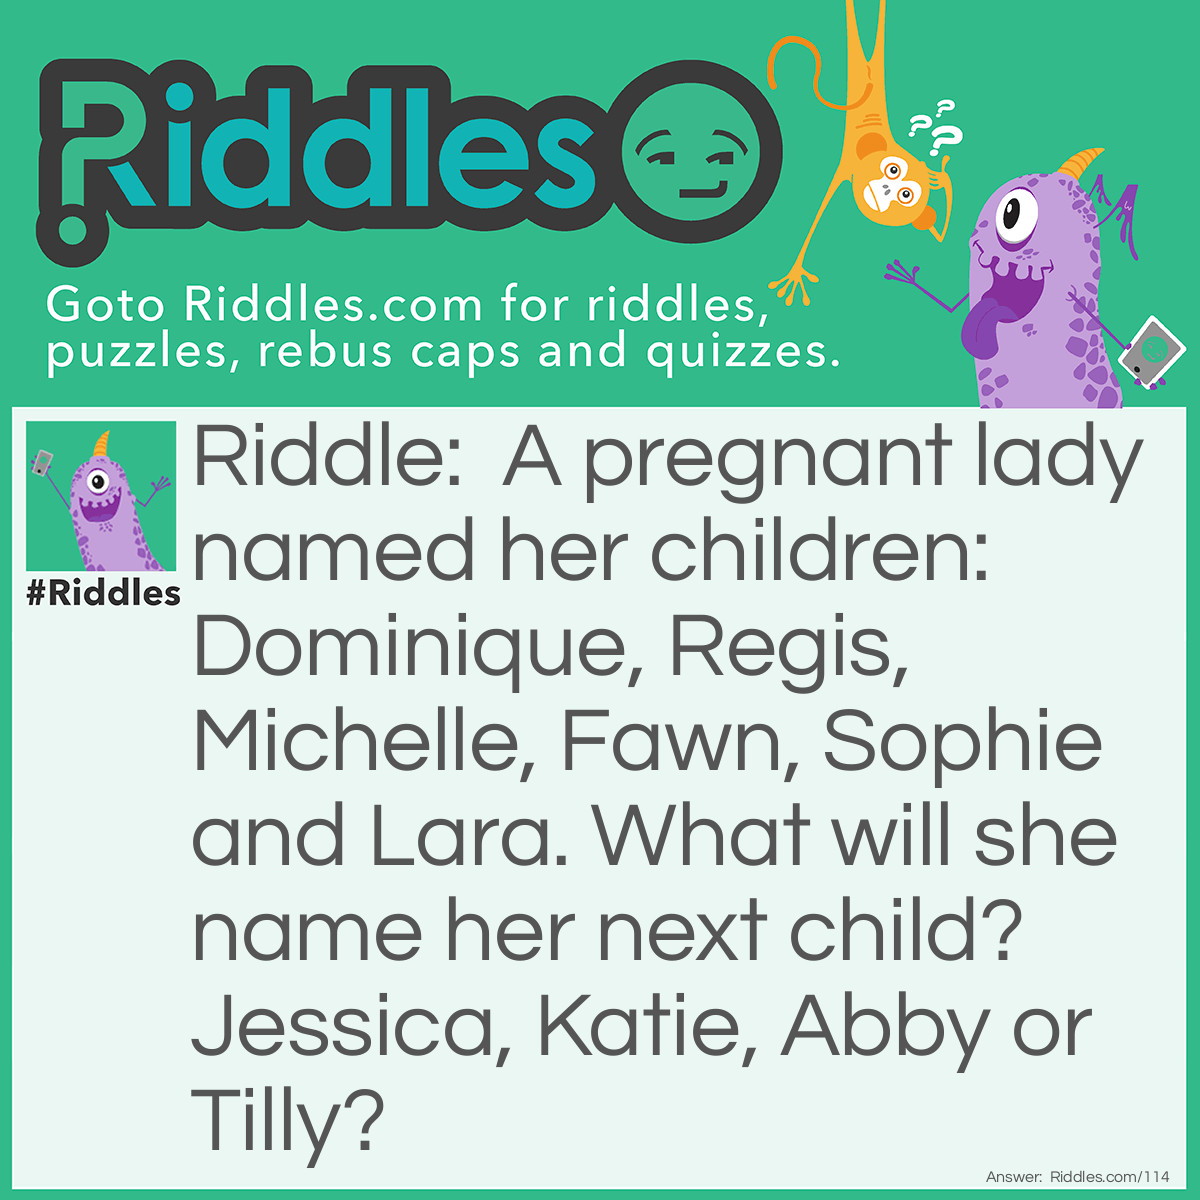 Riddle: A pregnant lady named her children: Dominique, Regis, Michelle, Fawn, Sophie, and Lara. What will she name her next child? Jessica, Katie, Abby, or Tilly? Answer: Tilly. She seems to follow the scale Do, Re, Me, Fa, So, La, and then Ti.